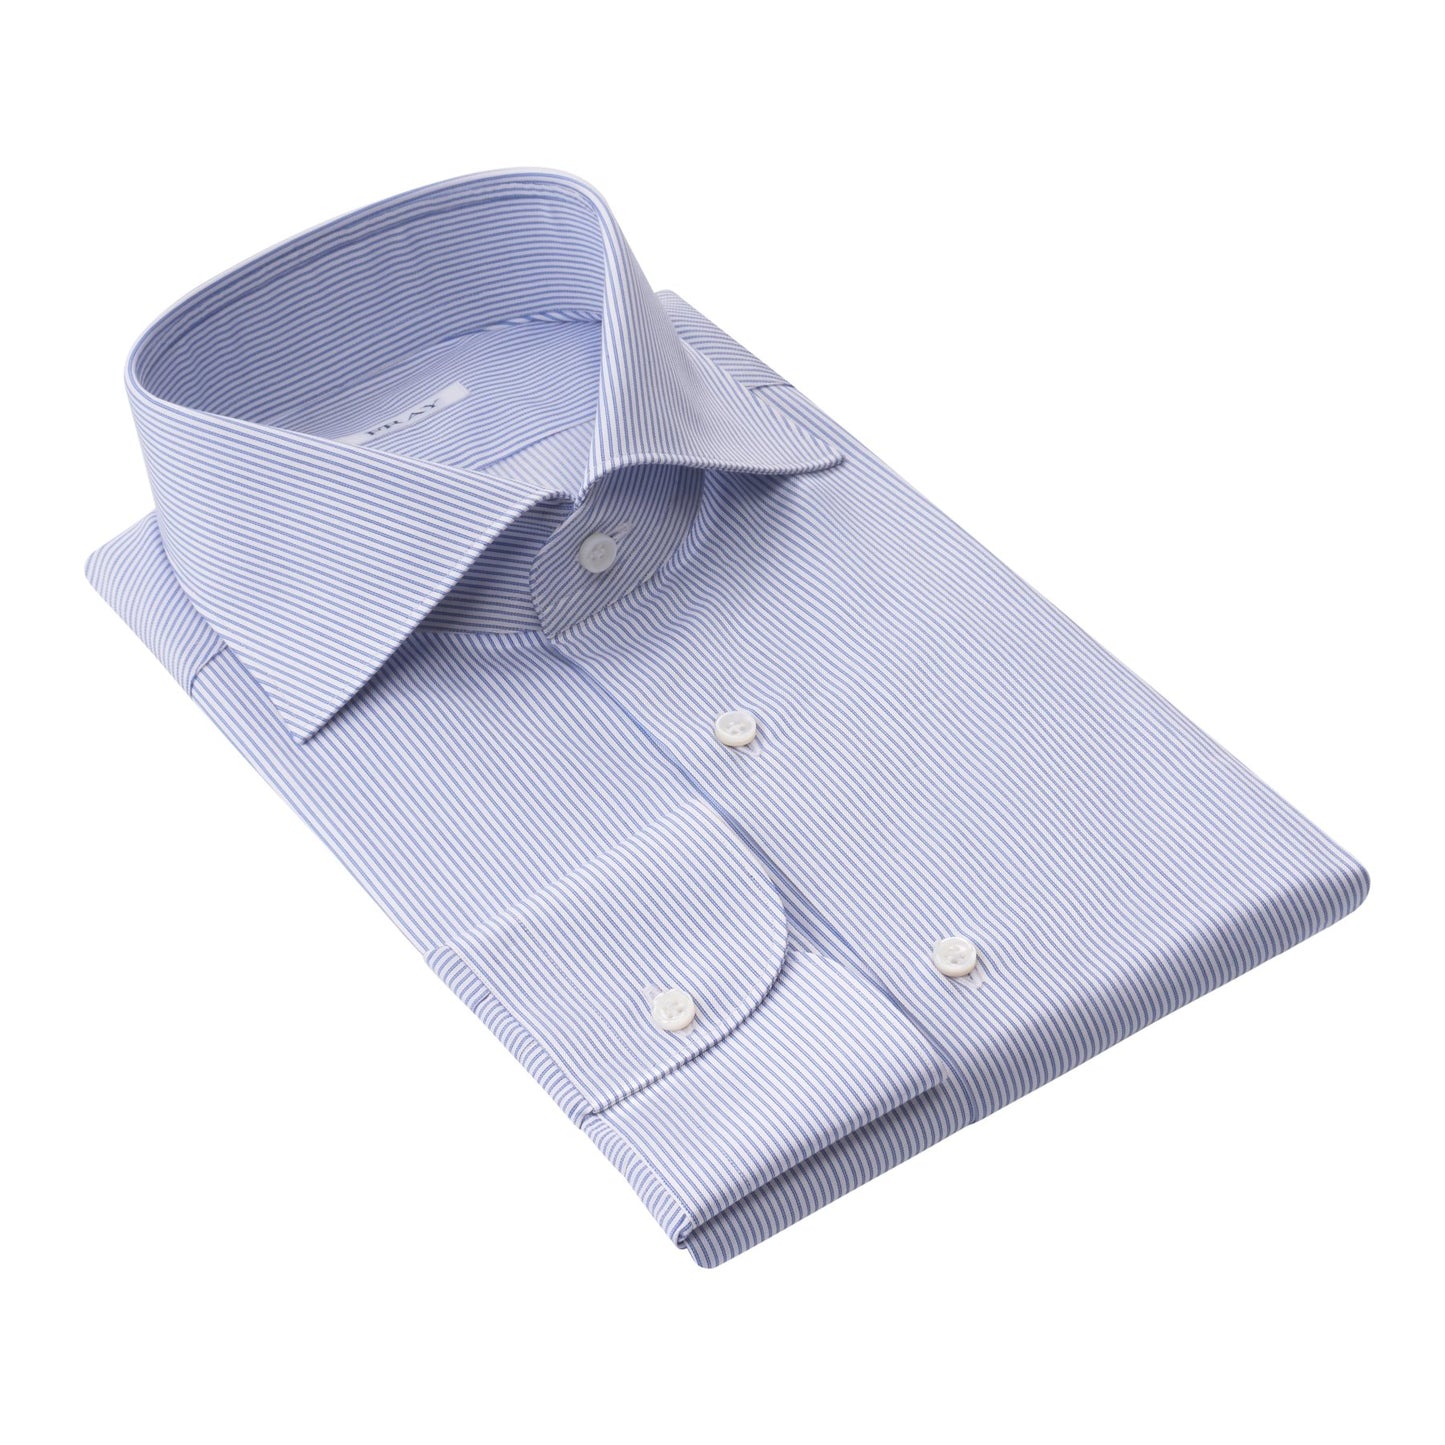 Fray Striped Cotton Shirt in White and Light Blue - SARTALE